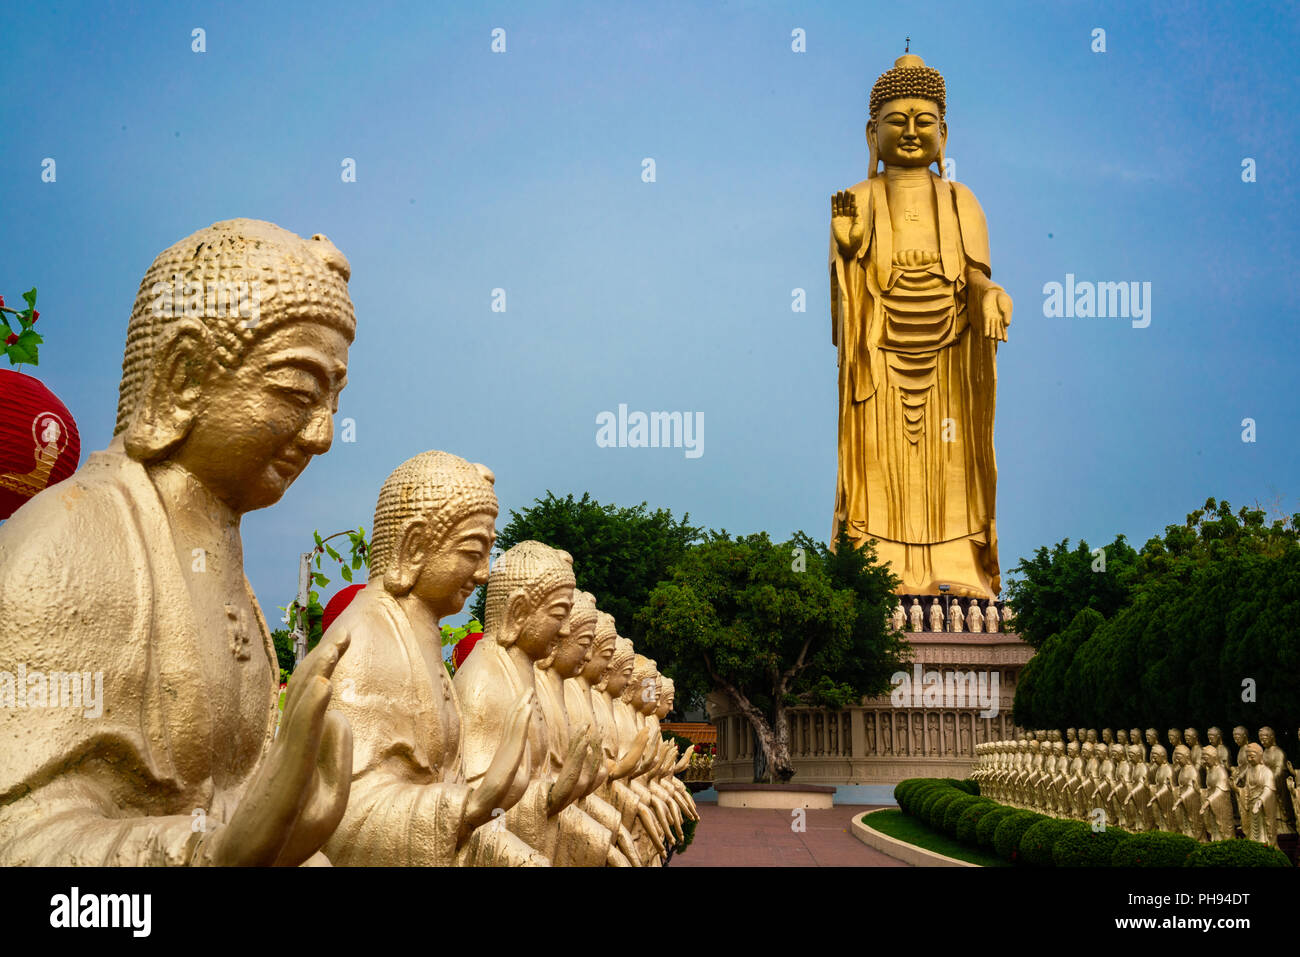 Close-up view of golden Buddha statue and giant Great Buddha statue in background at Fo Guang Shan Monastery in Kaohsiung Taiwan Stock Photo